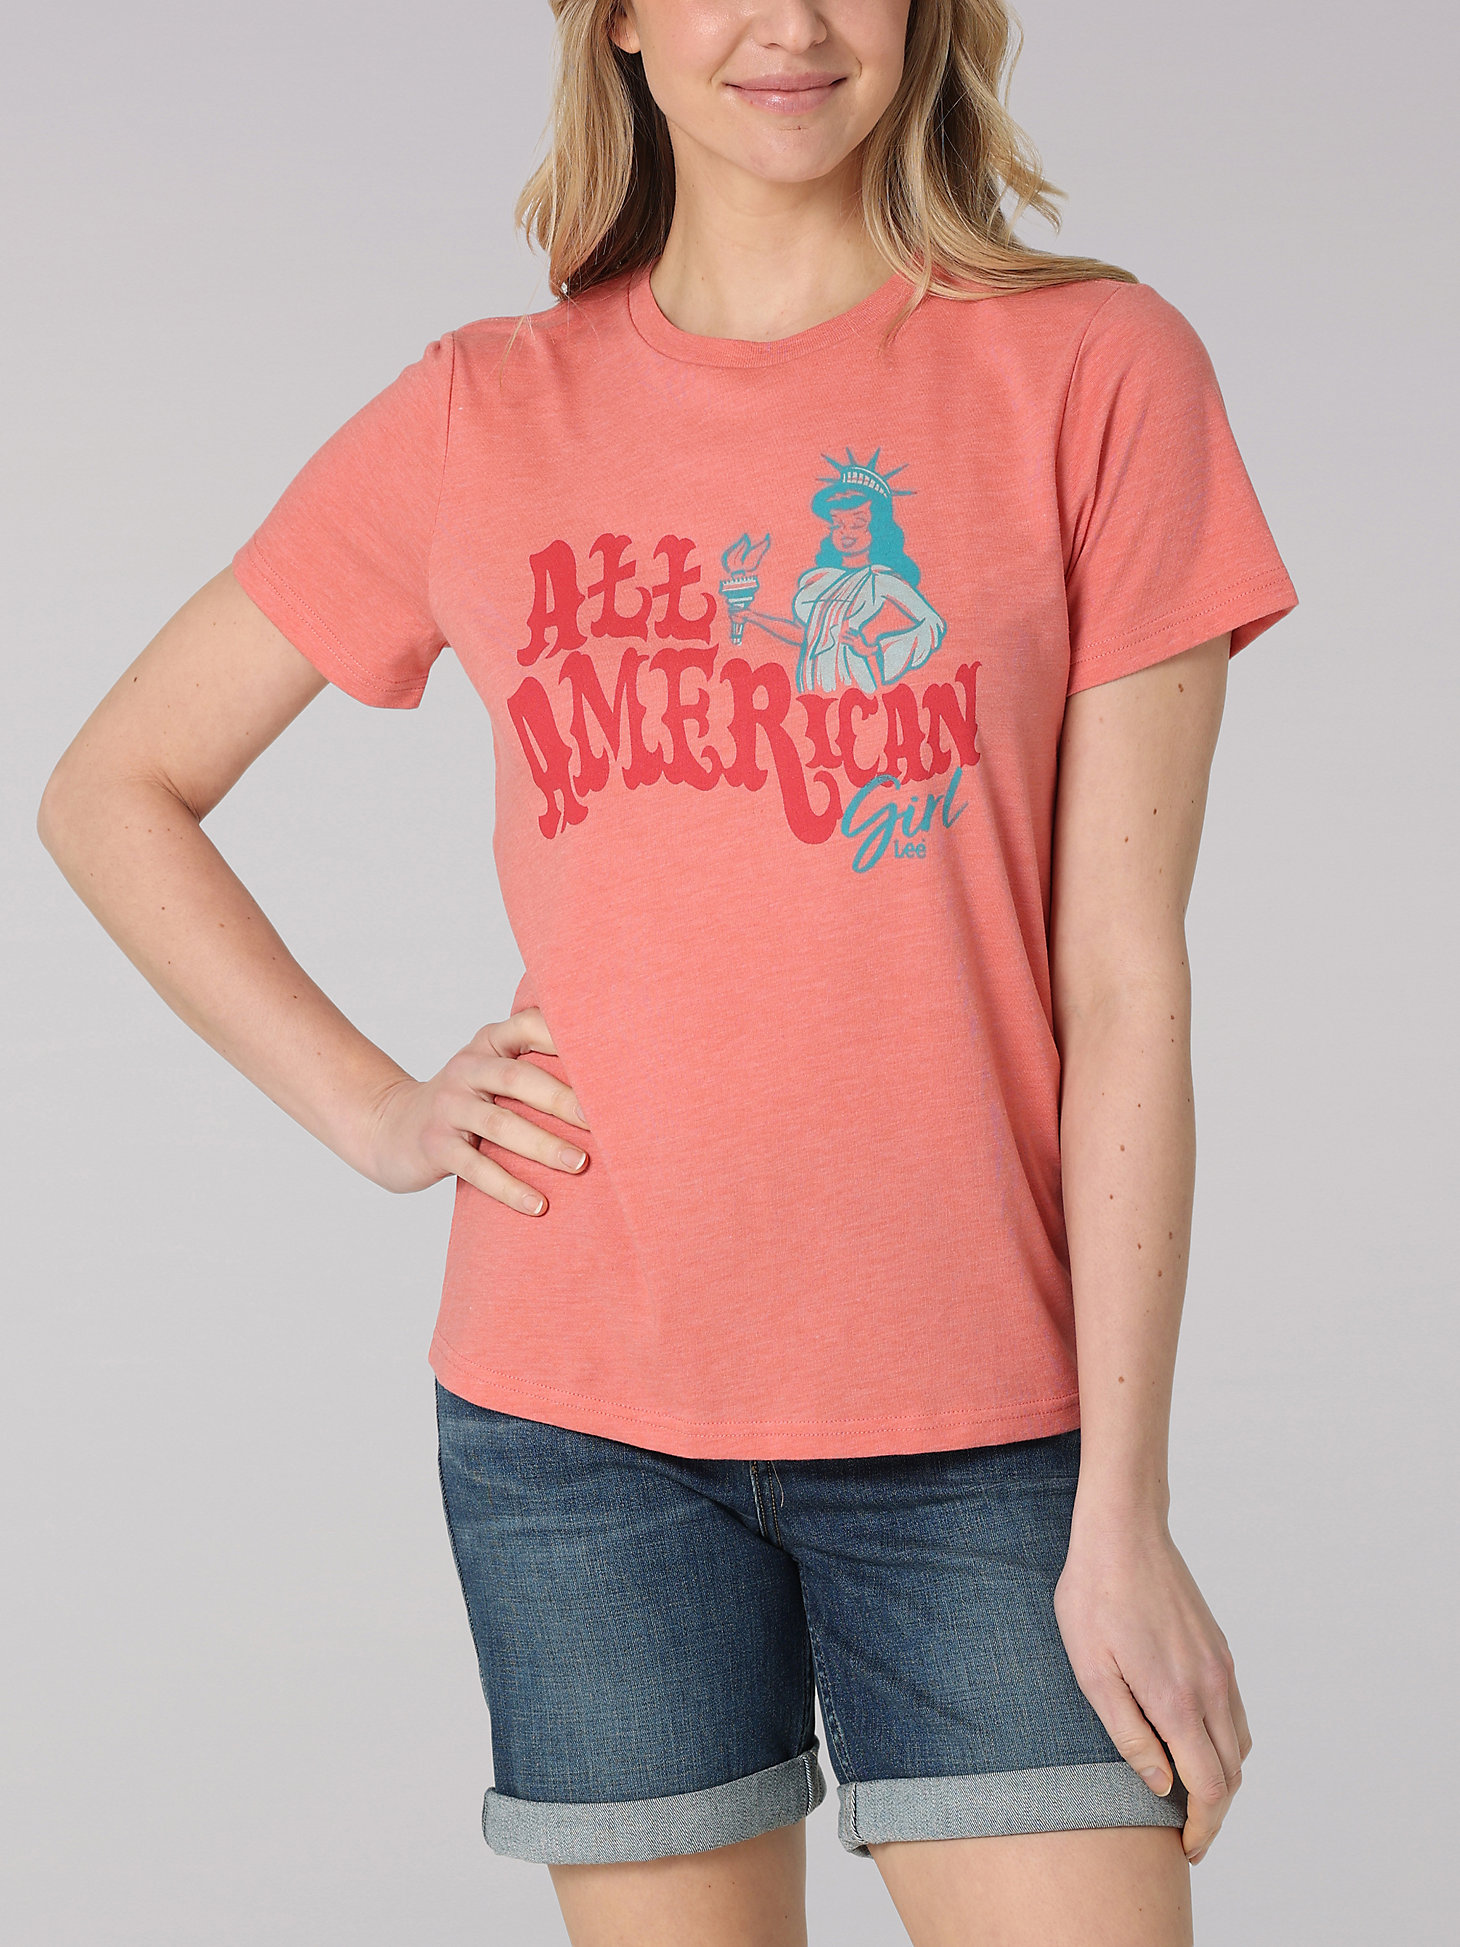 Women's Lee All American Graphic Tee in Envy Heather main view